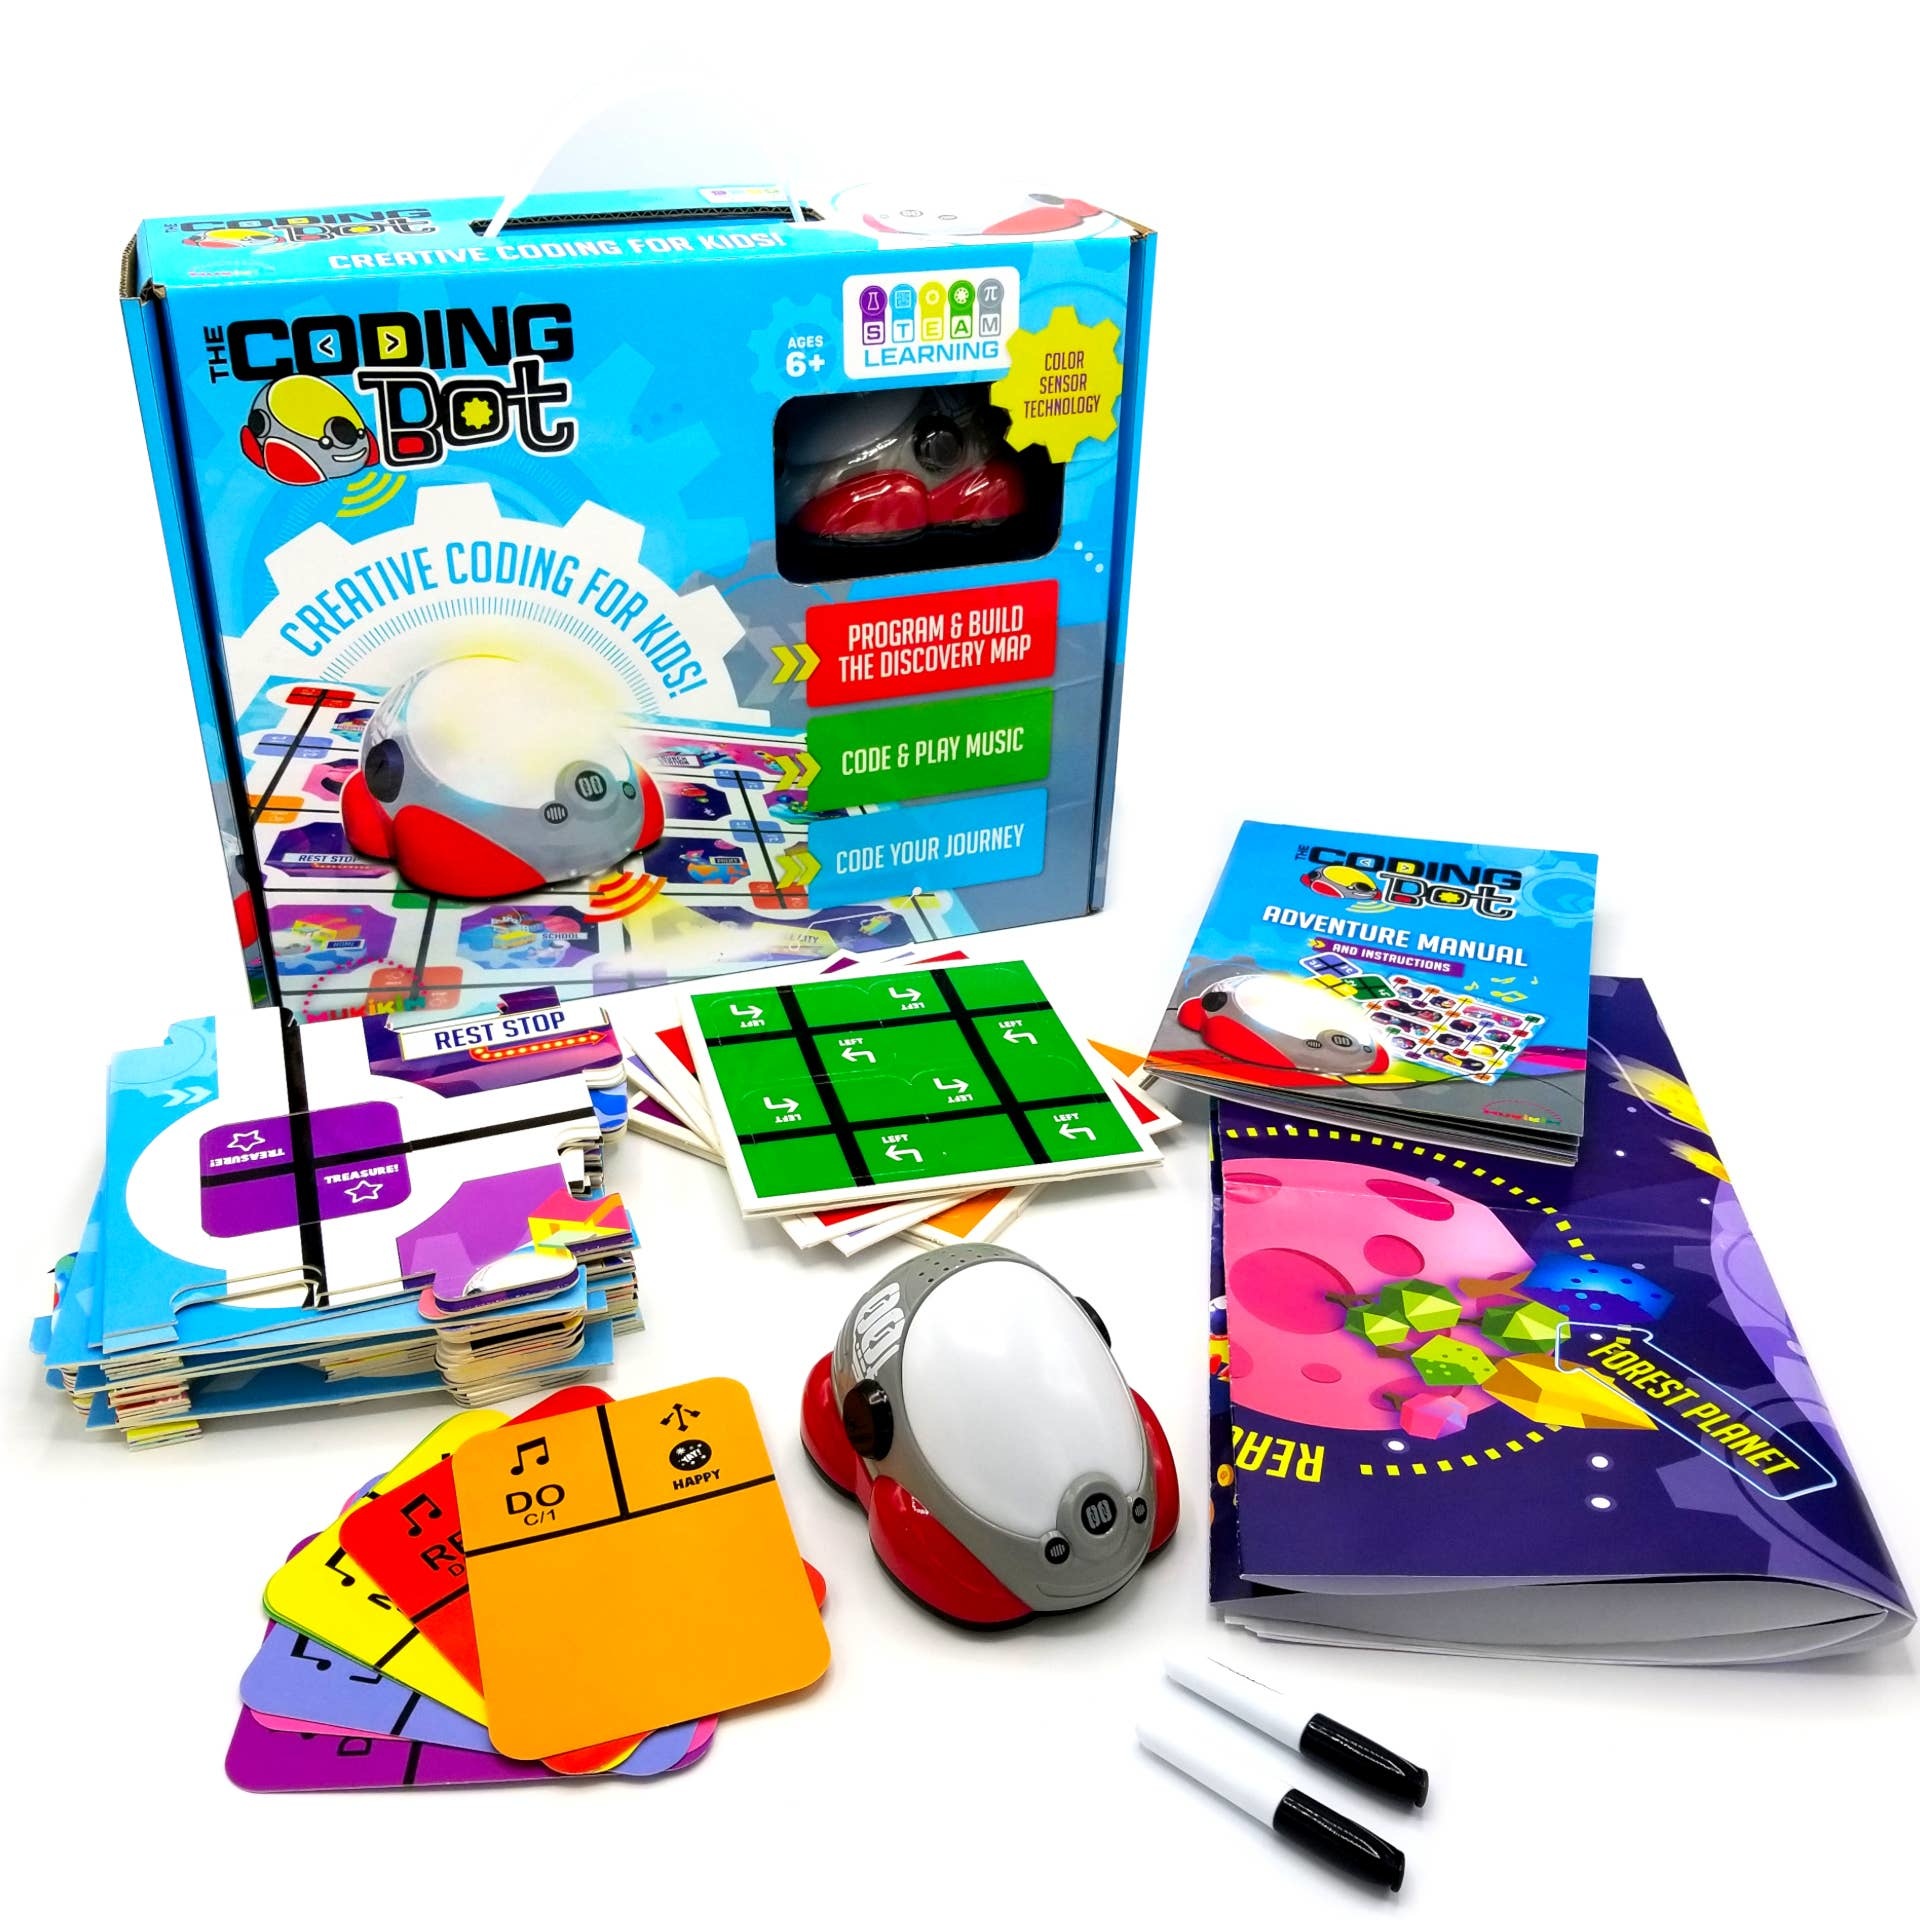 The Coding Bot - STEM Educational Coding Toy Robot For Kids